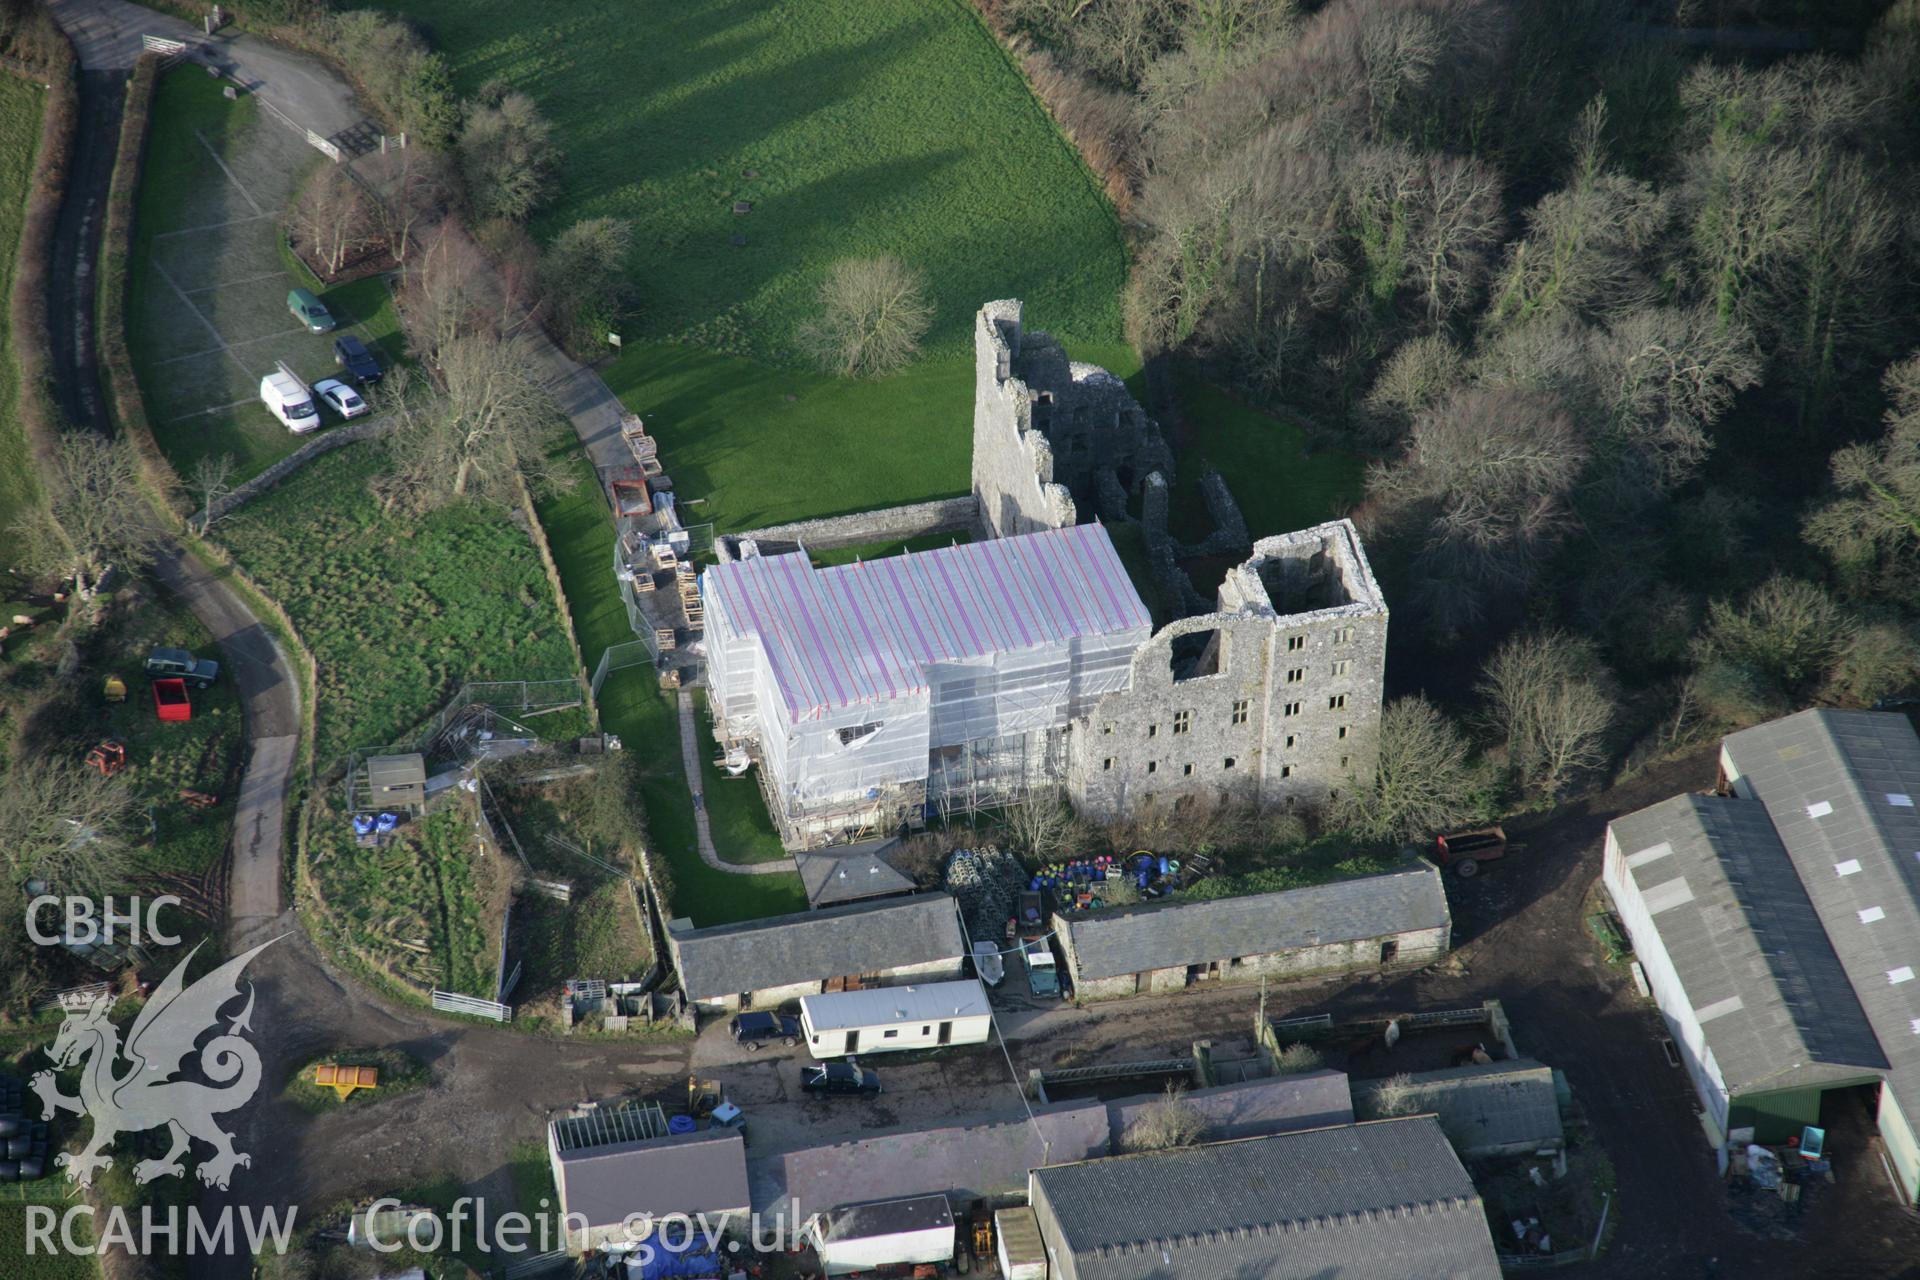 RCAHMW colour oblique aerial photograph of Oxwich Castle, with restoration in progress, in wide view from the south. Taken on 26 January 2006 by Toby Driver.